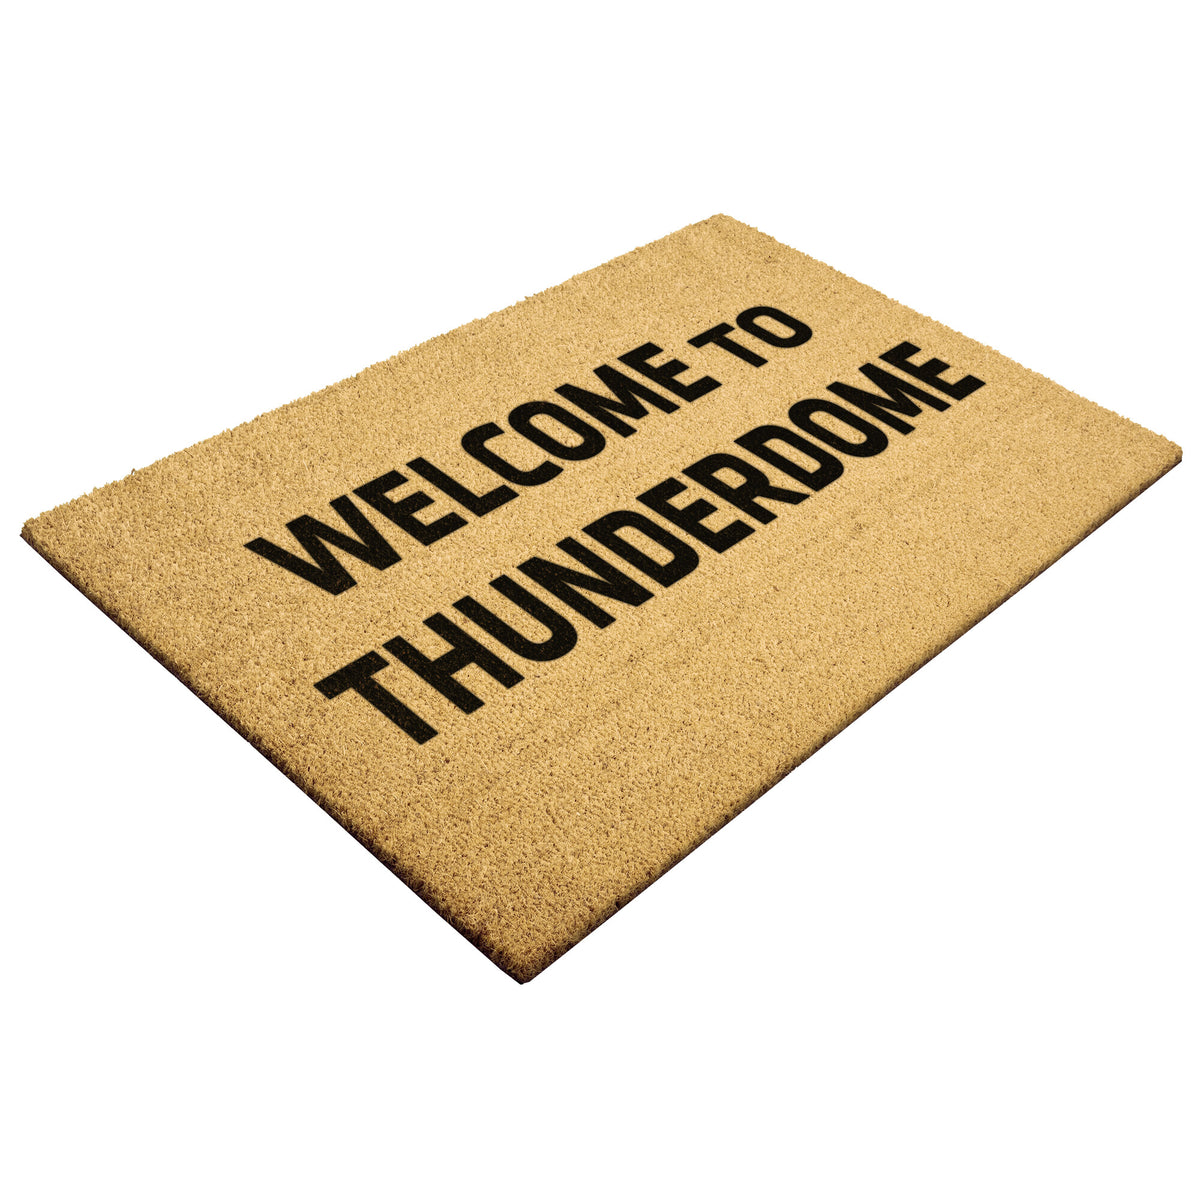 Welcome to Thunderdome Doormat